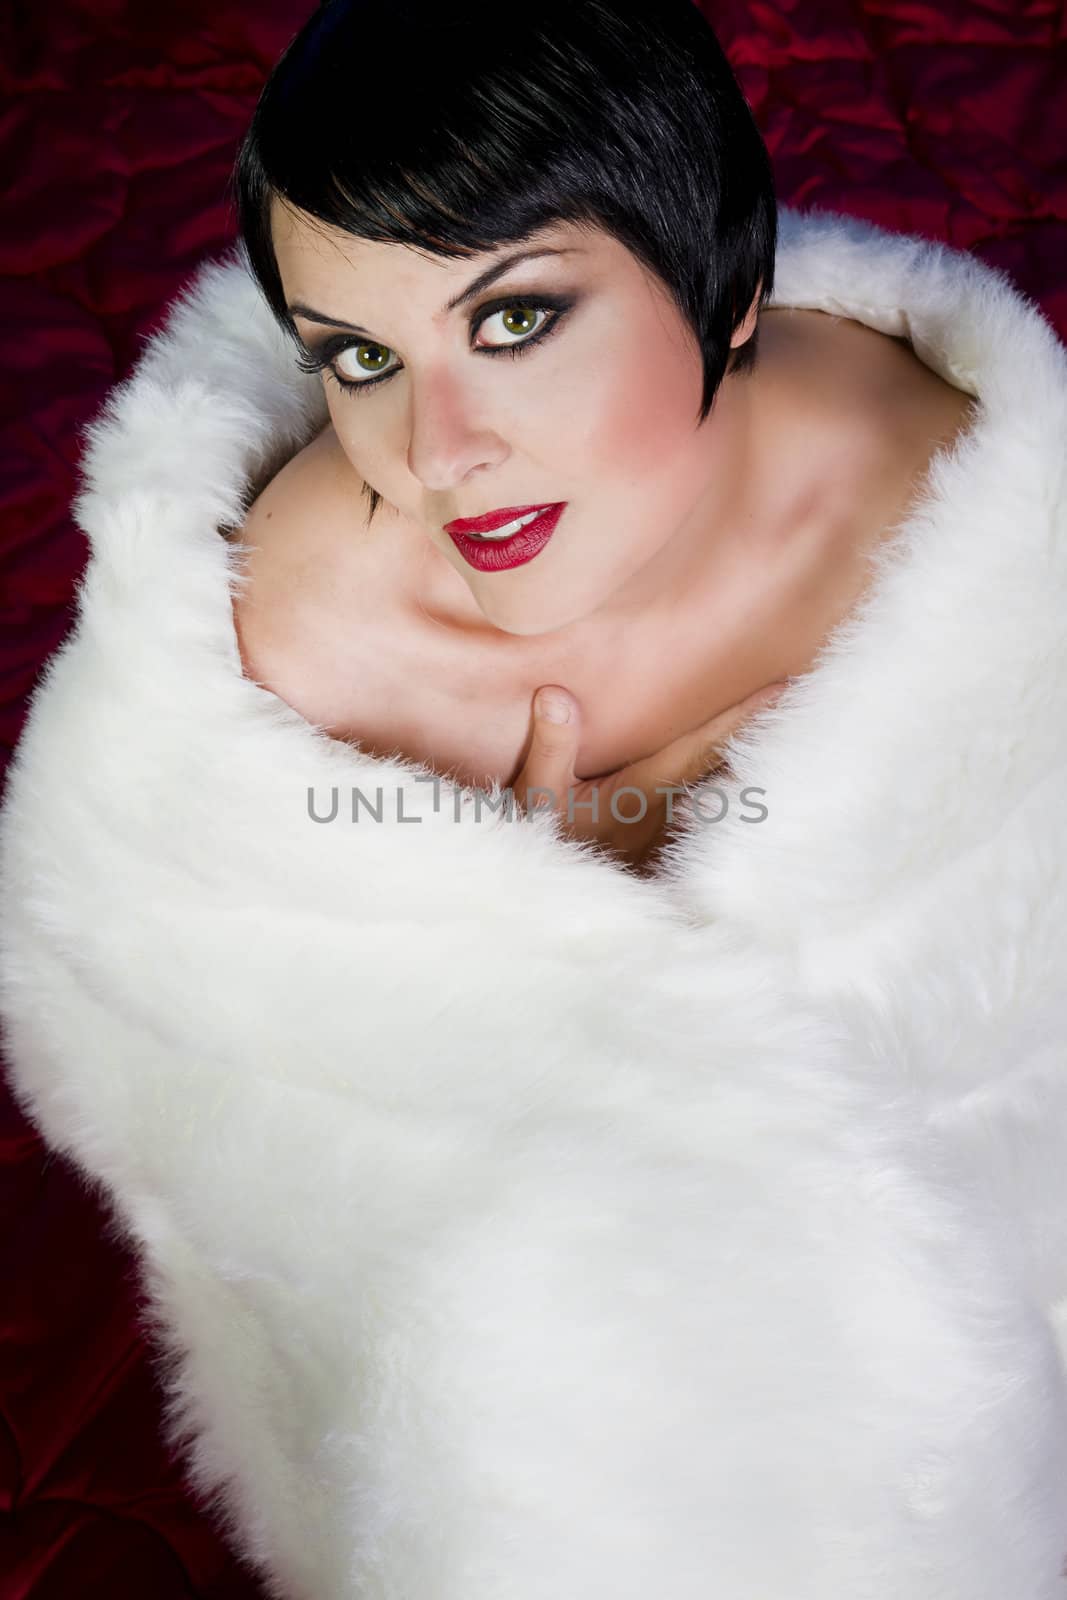 sensuous short haired brunette woman, bare shoulders with heart shaped white fur, 20s old hollywood star style